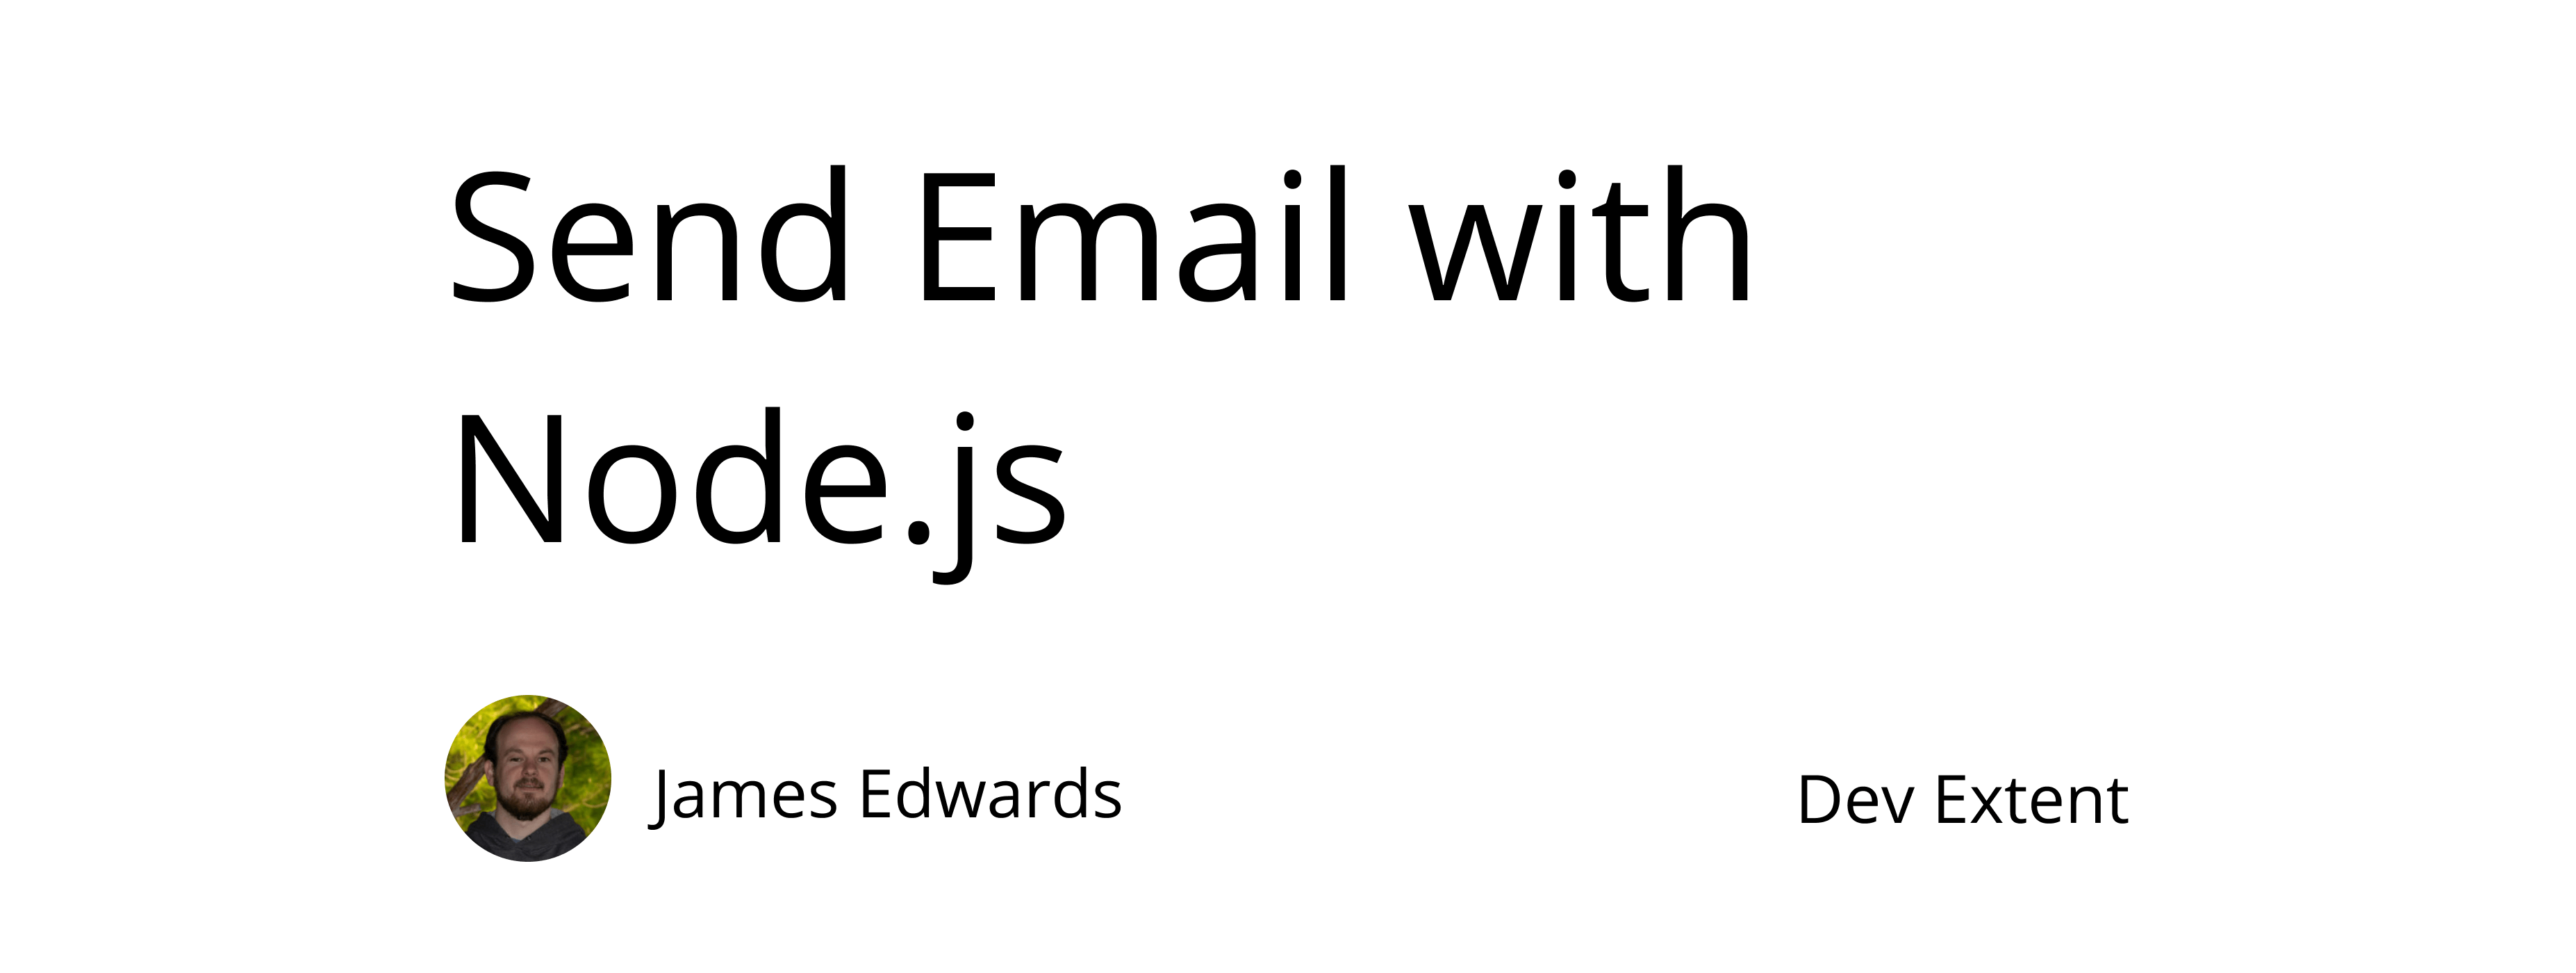 Send email with Node.js using the SendGrid npm package